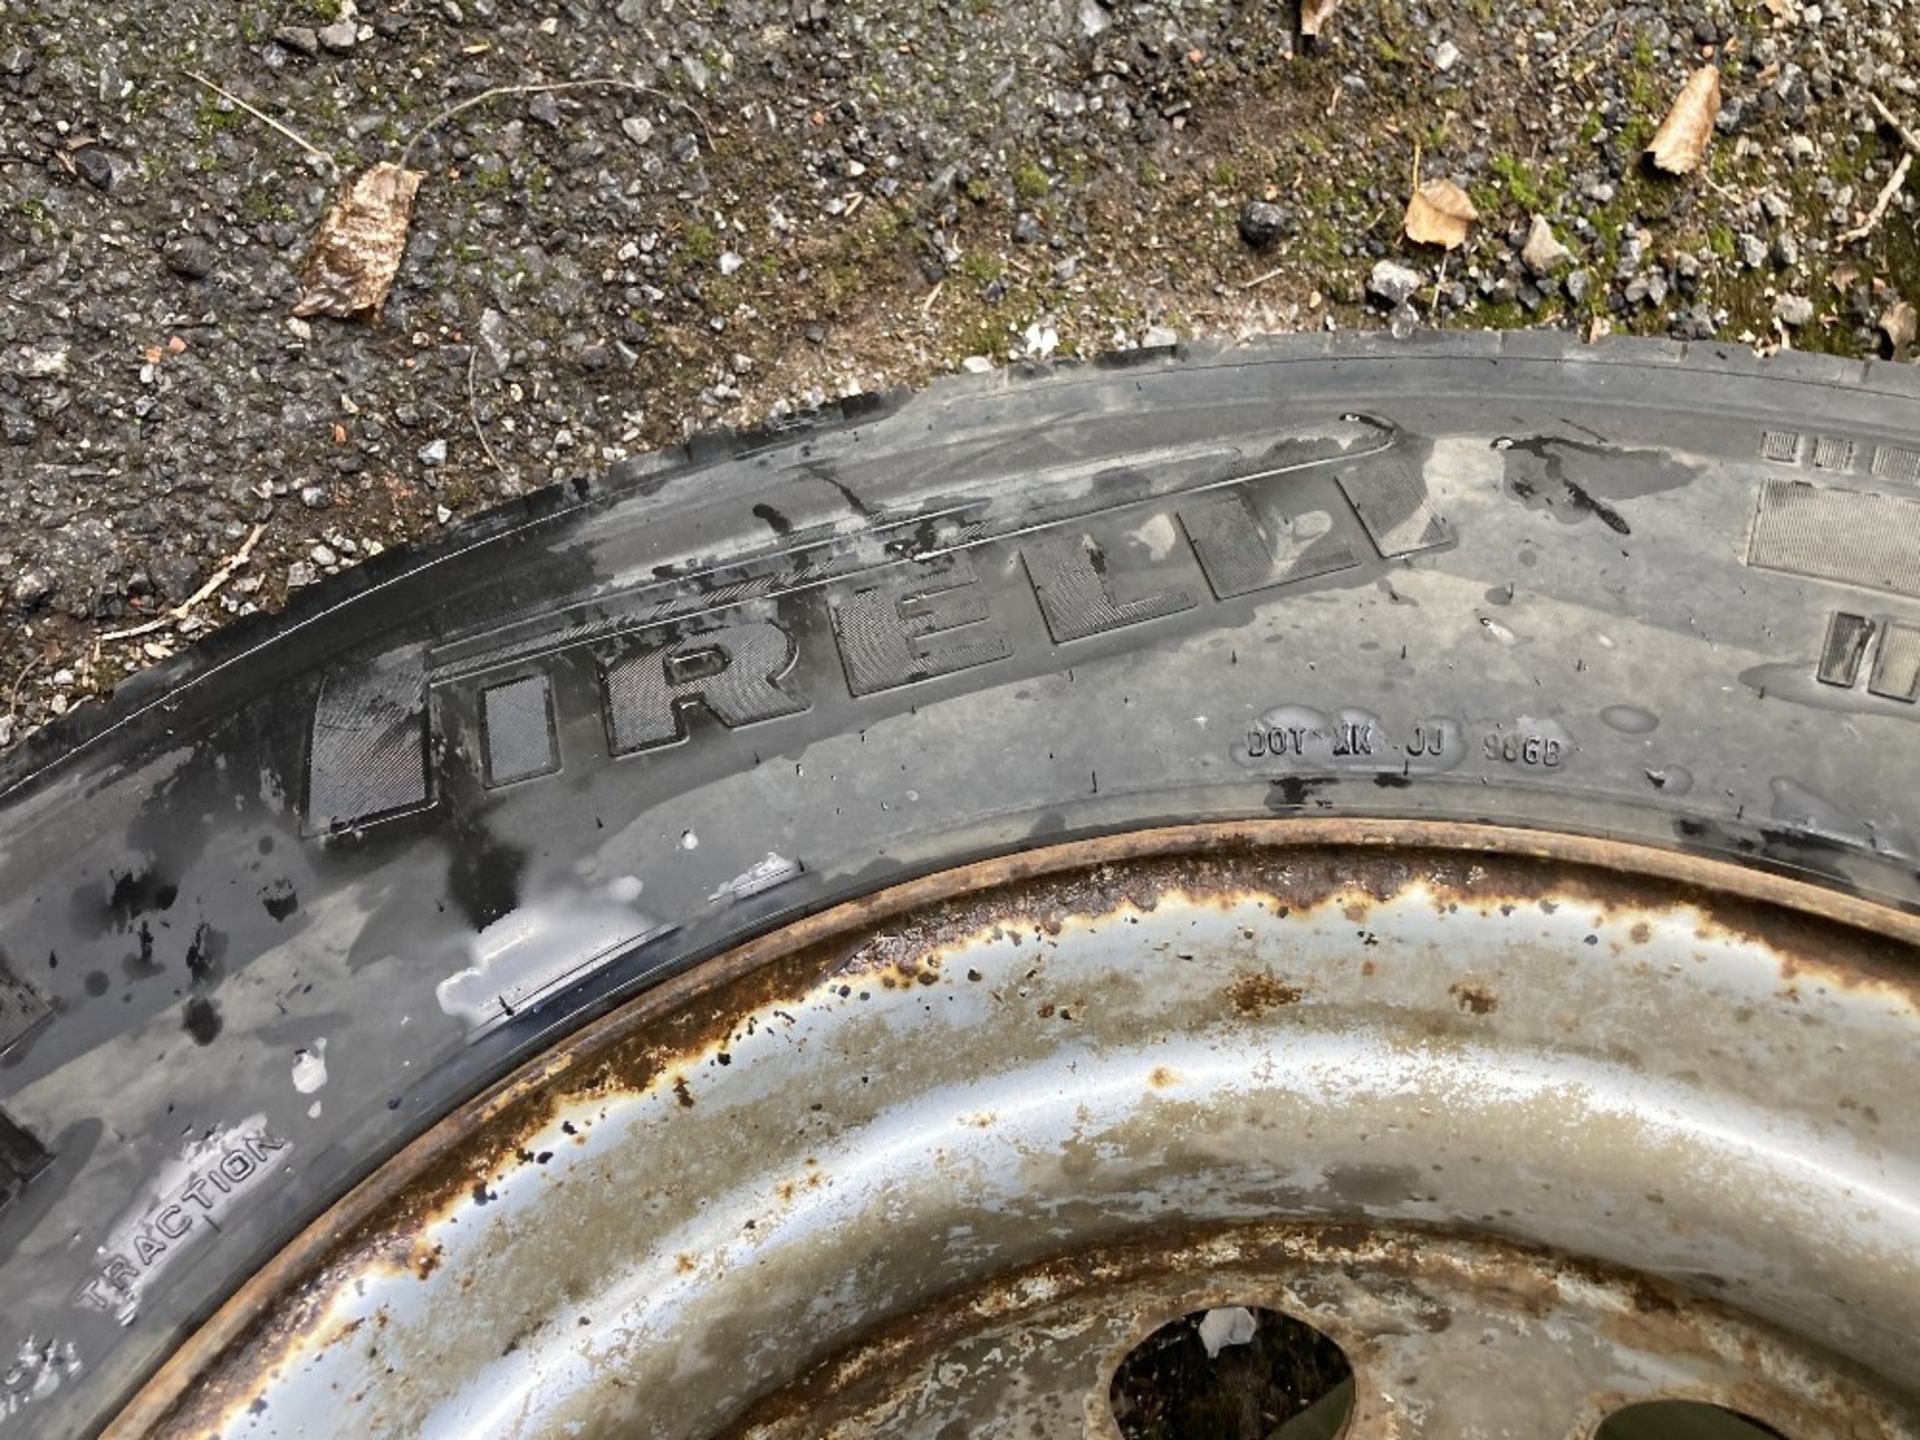 Pirelli TR-01 295/80R 22.5 radial tubeless regroovable HGV tyre - Image 2 of 4